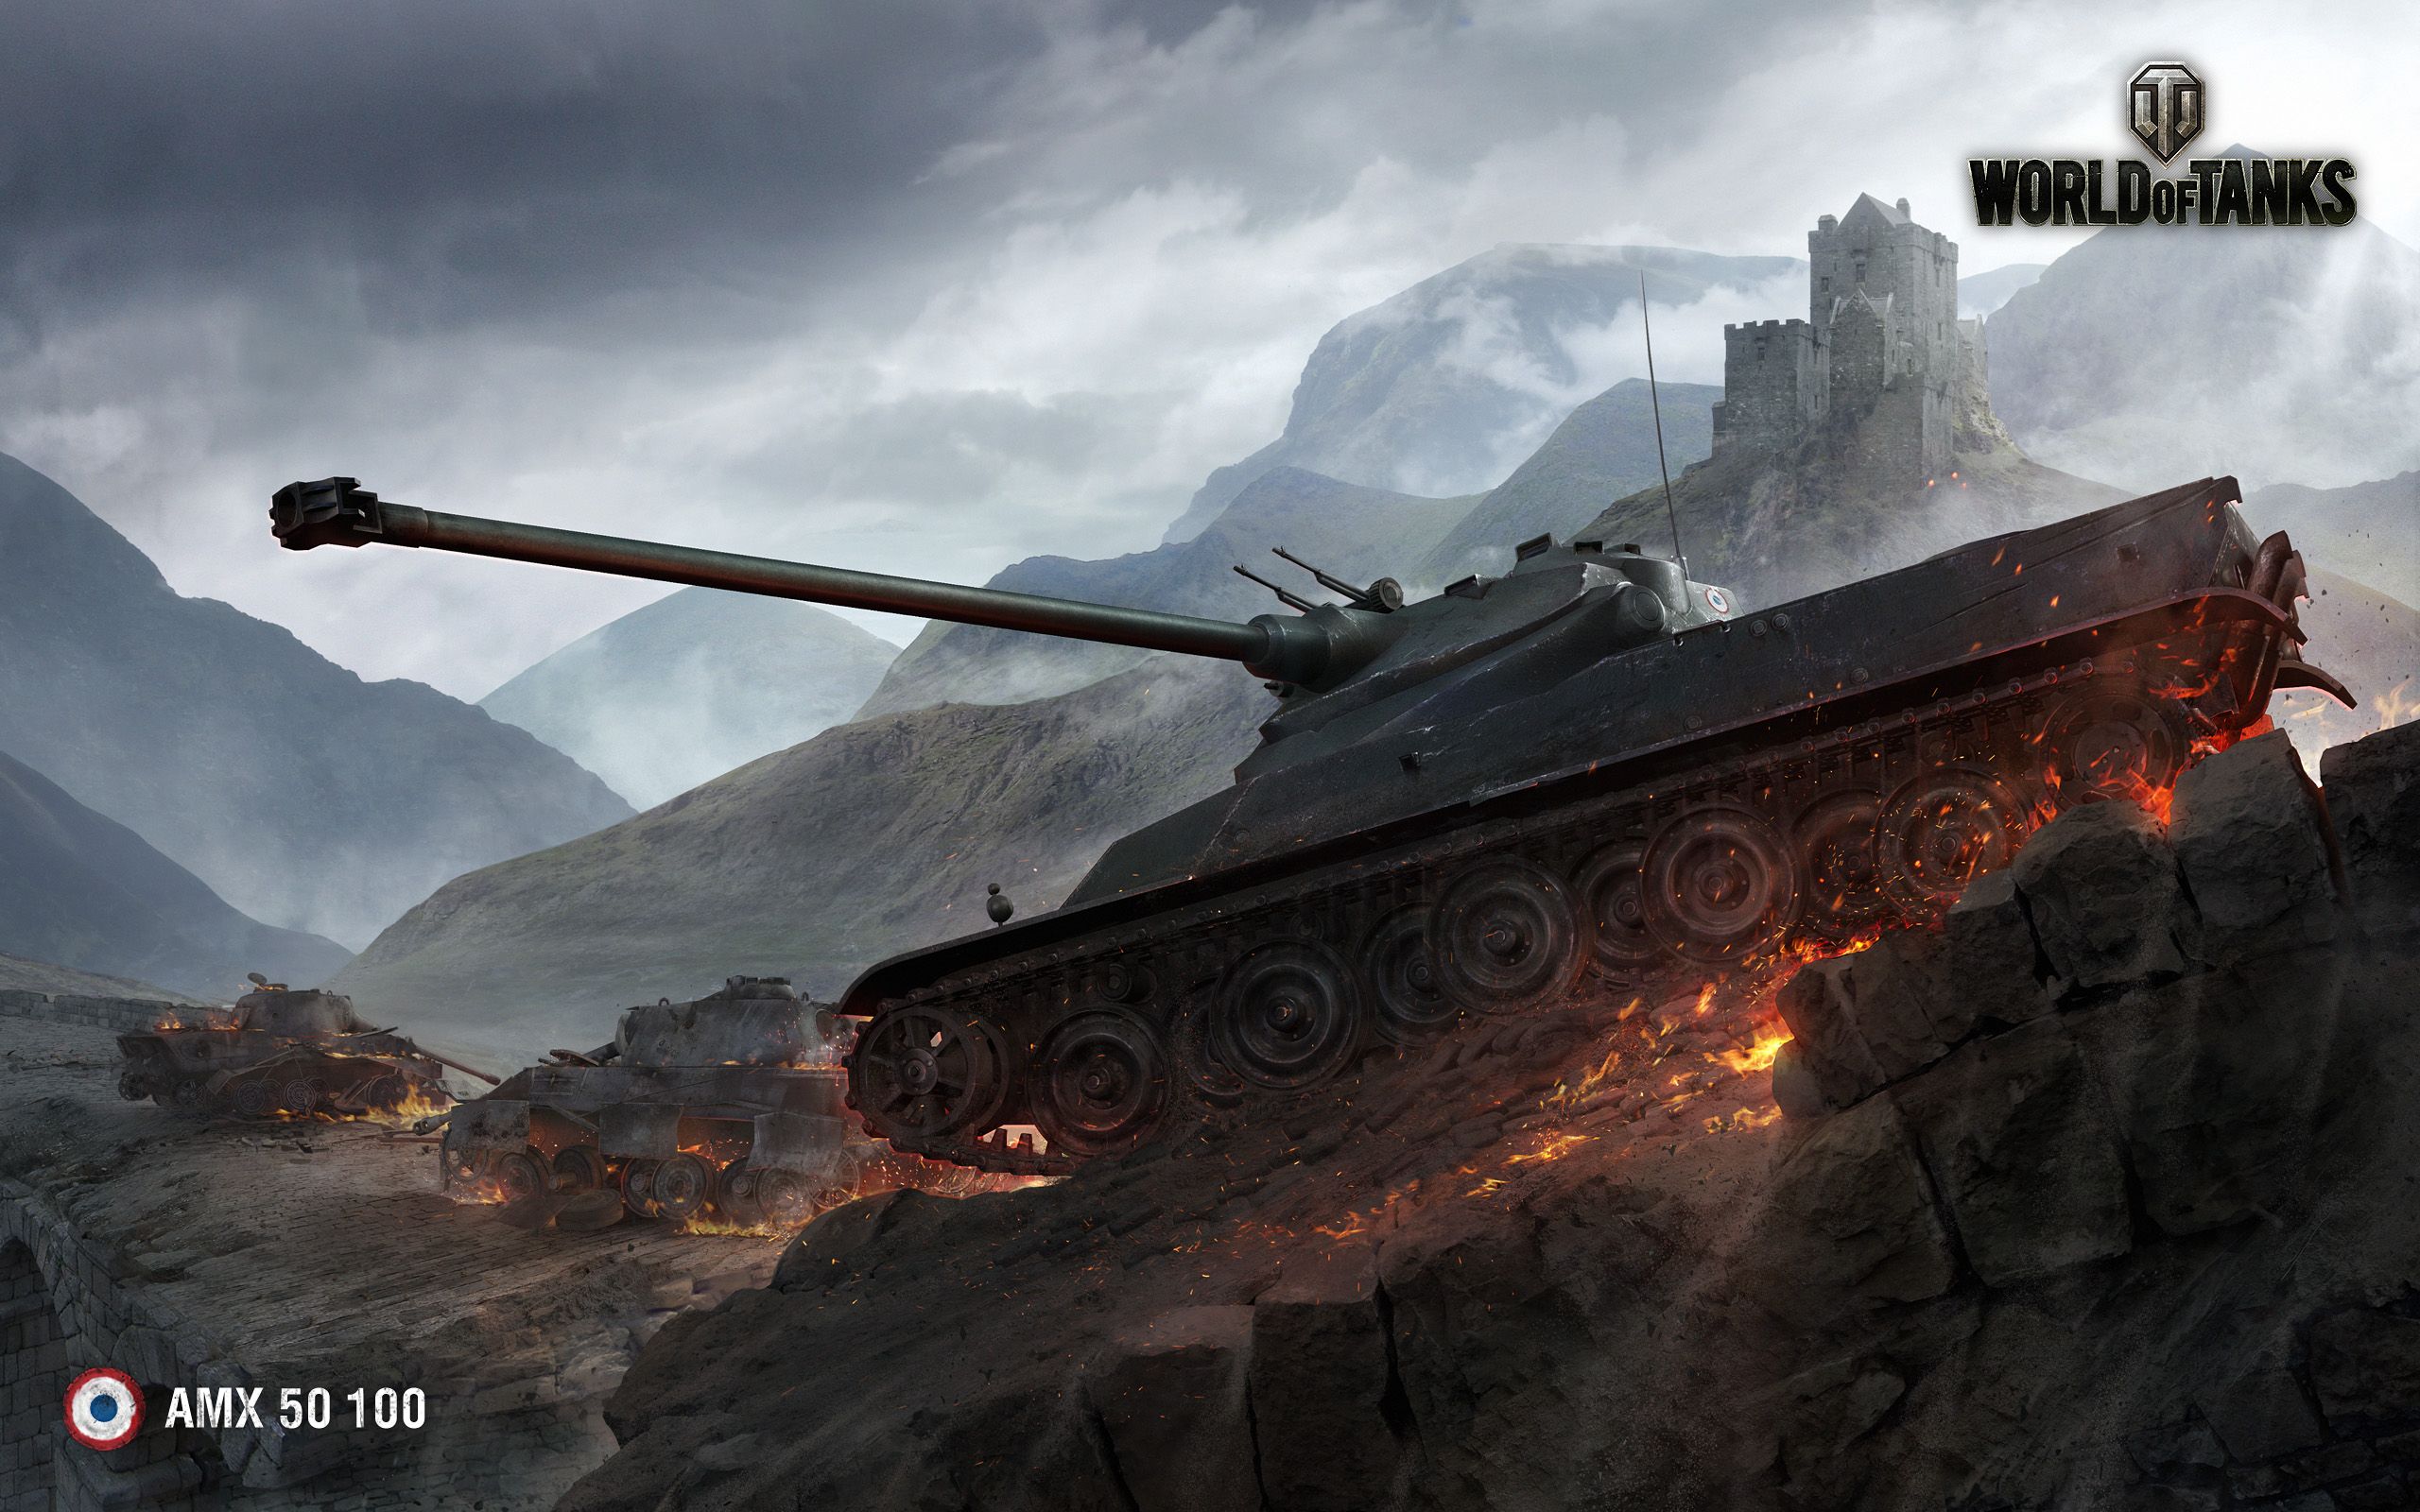 AMX 50 100 World of Tanks Wallpapers HD Backgrounds